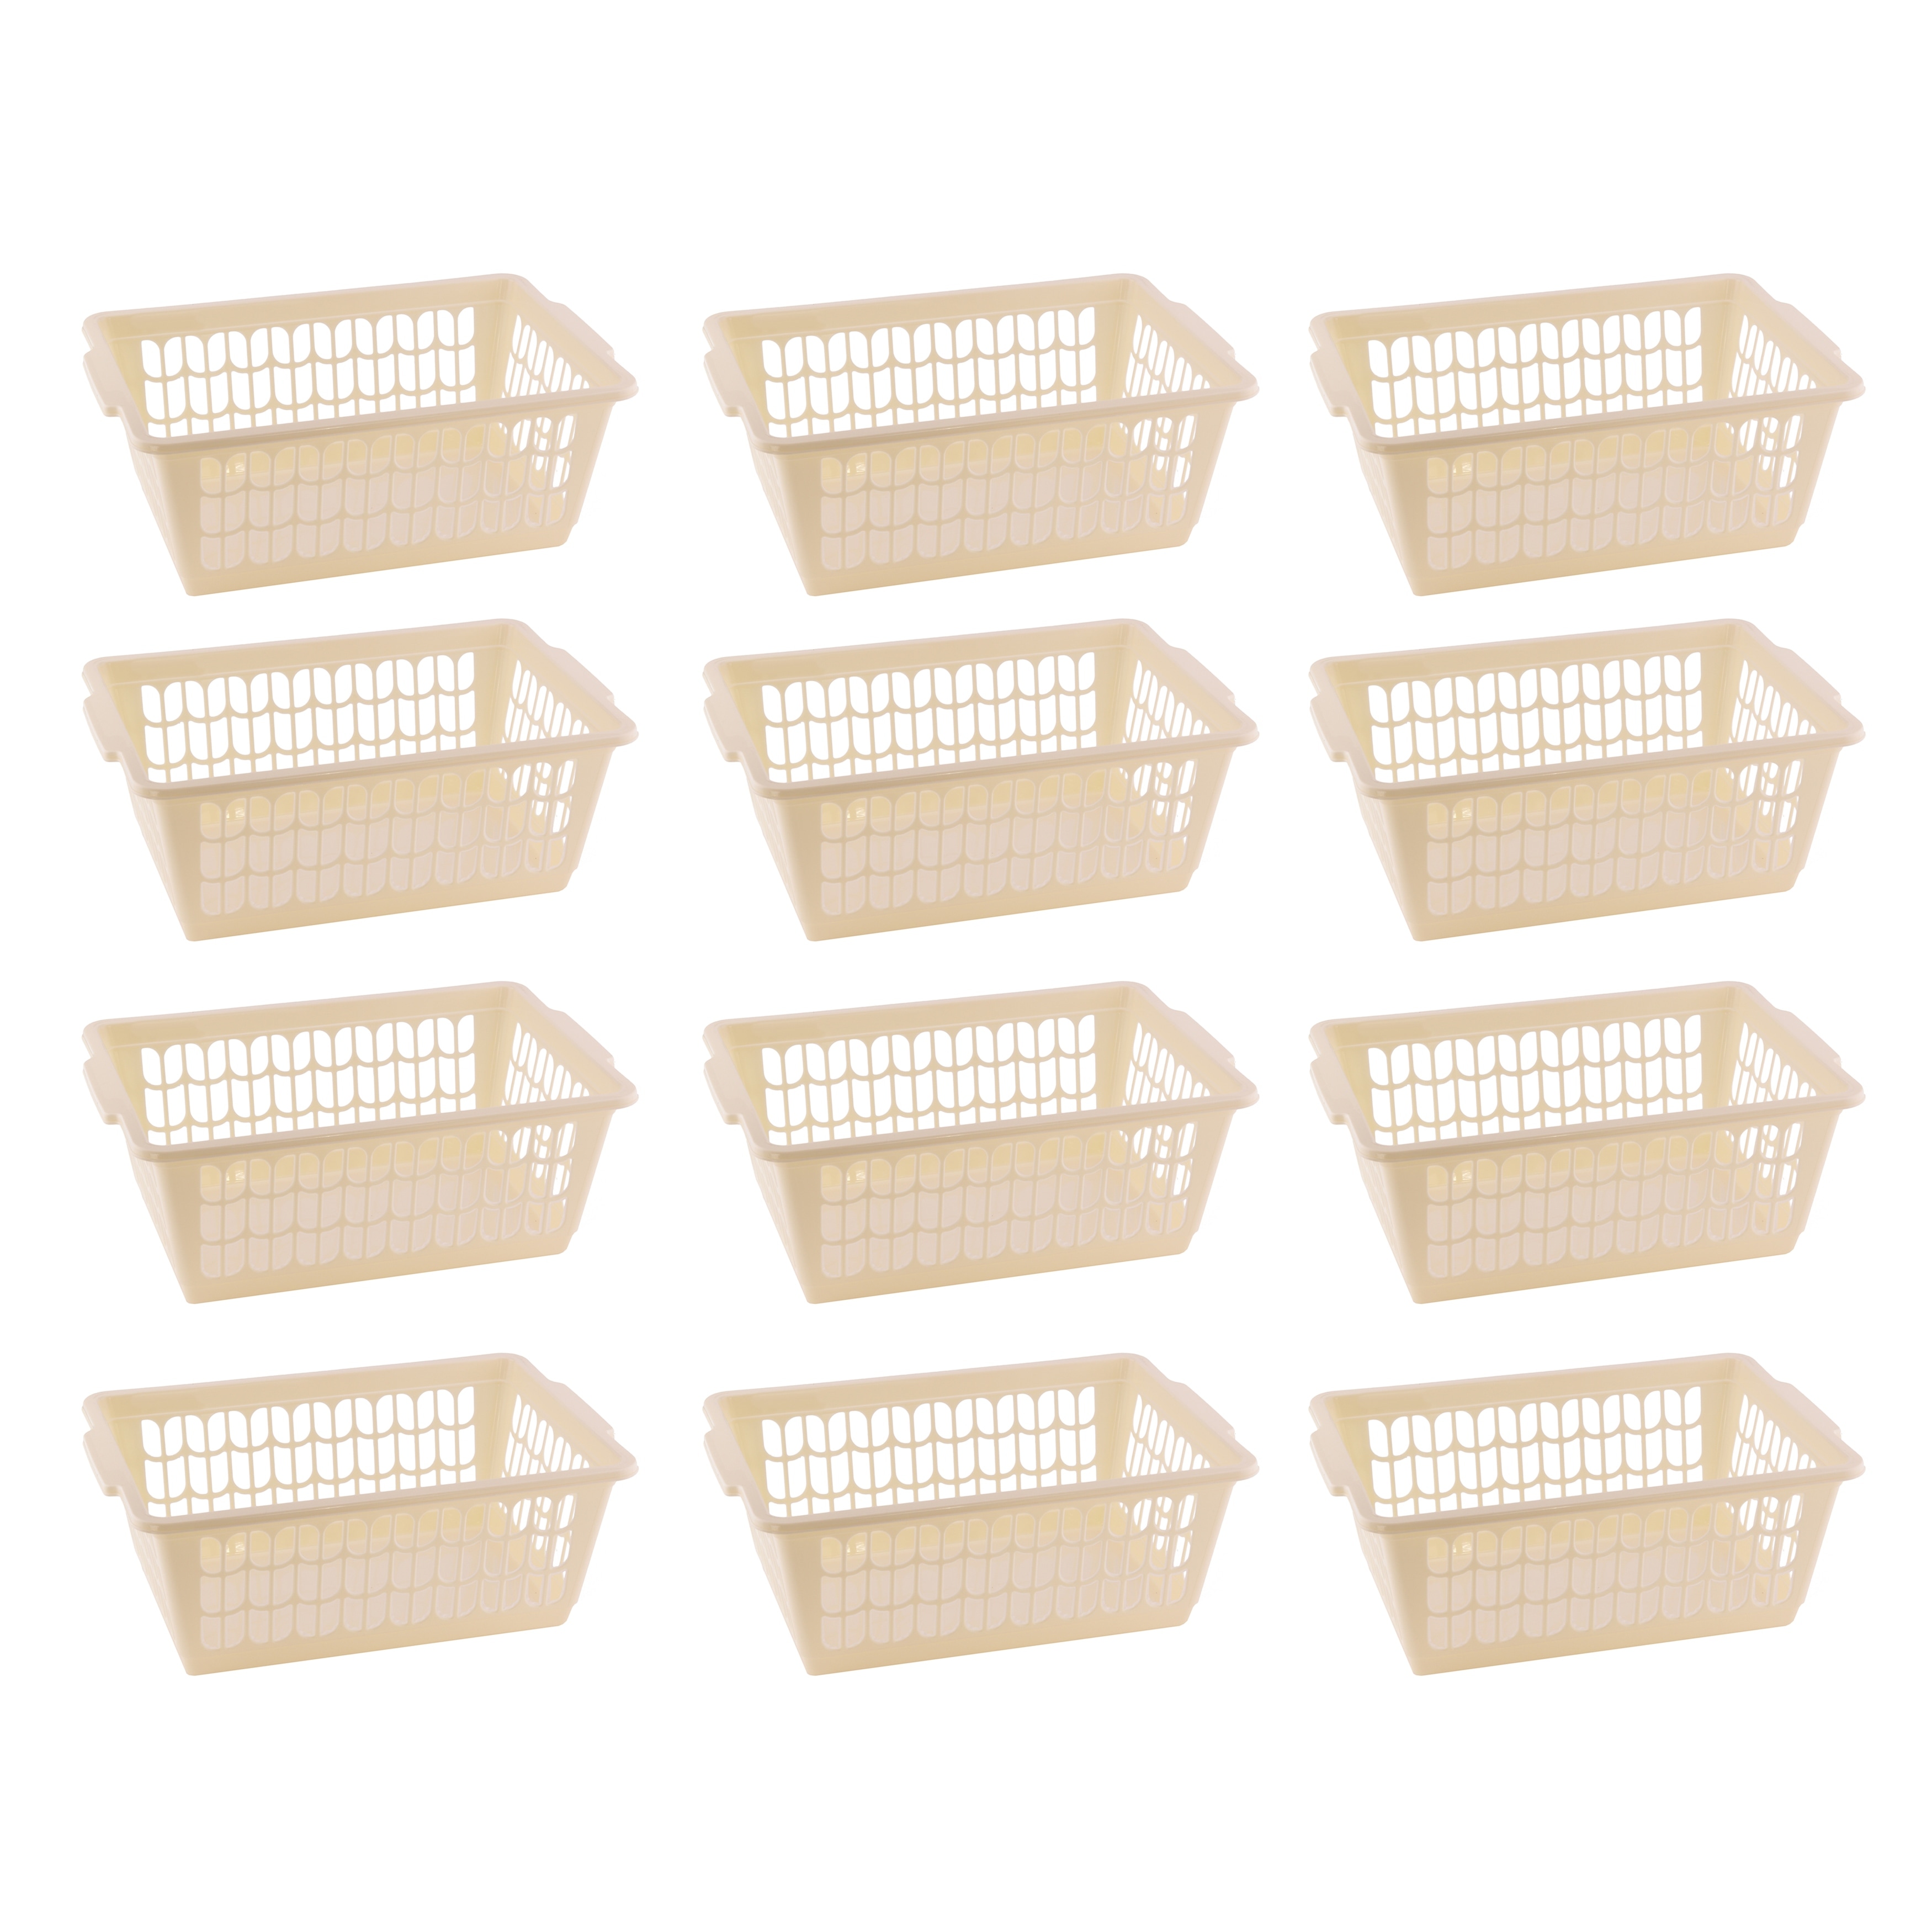 https://ak1.ostkcdn.com/images/products/is/images/direct/11ebee7576aa17f6c43a4952e97e44d55a0dd96f/Small-Plastic-Storage-Basket-for-Organizing-Kitchen-Pantry%2C-Countertop.jpg